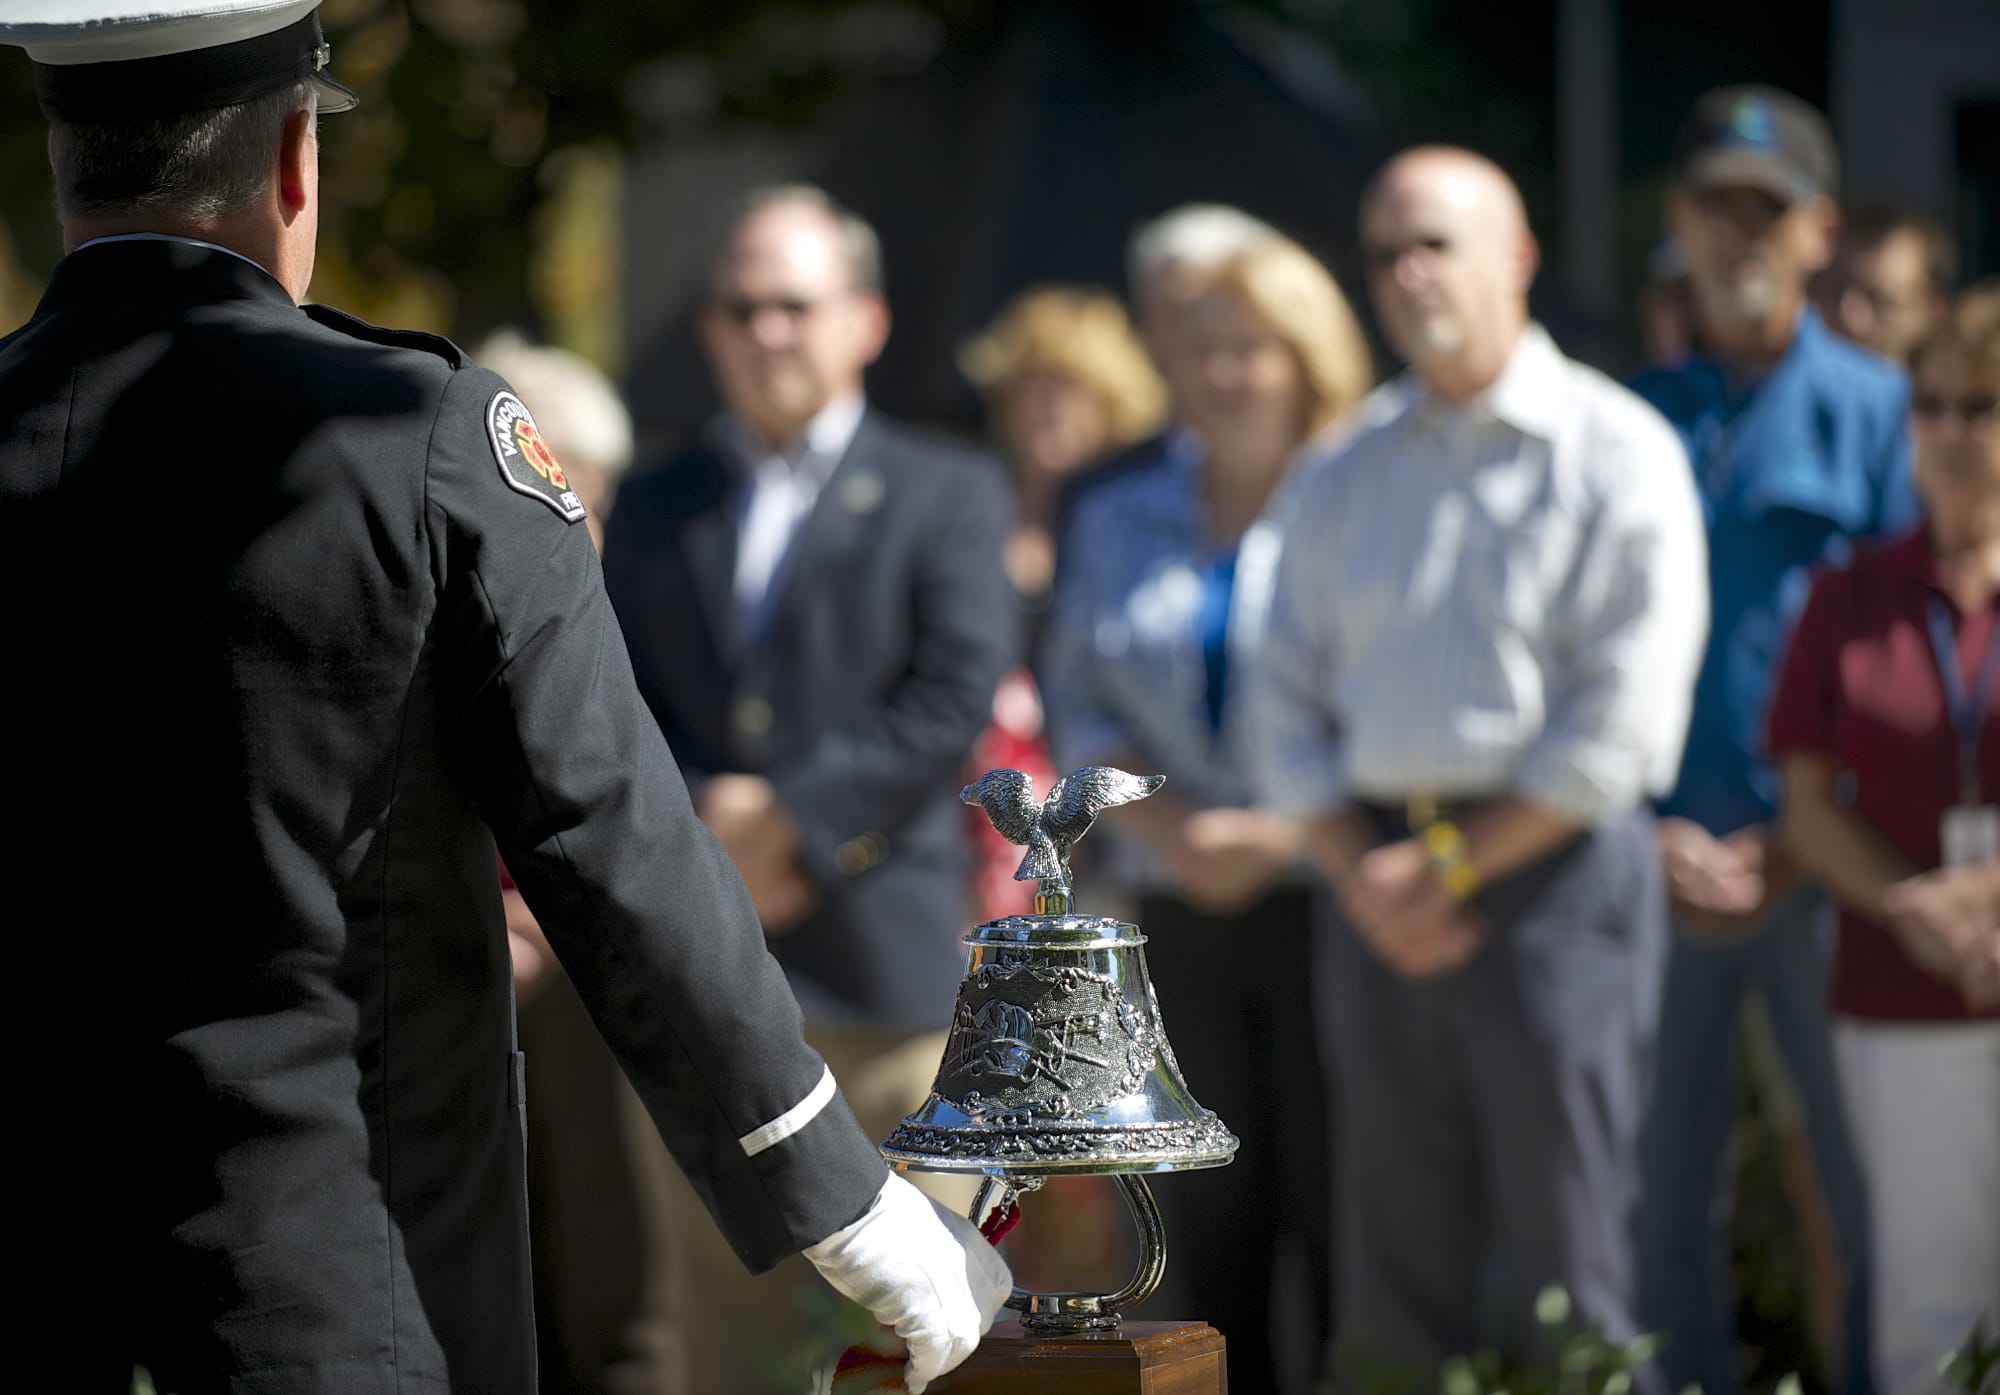 Zachary Kaufman/The Columbian
Vancouver Fire Capt. Perry LeDoux rings a bell to honor those who were lost on Sept.11, 2001.